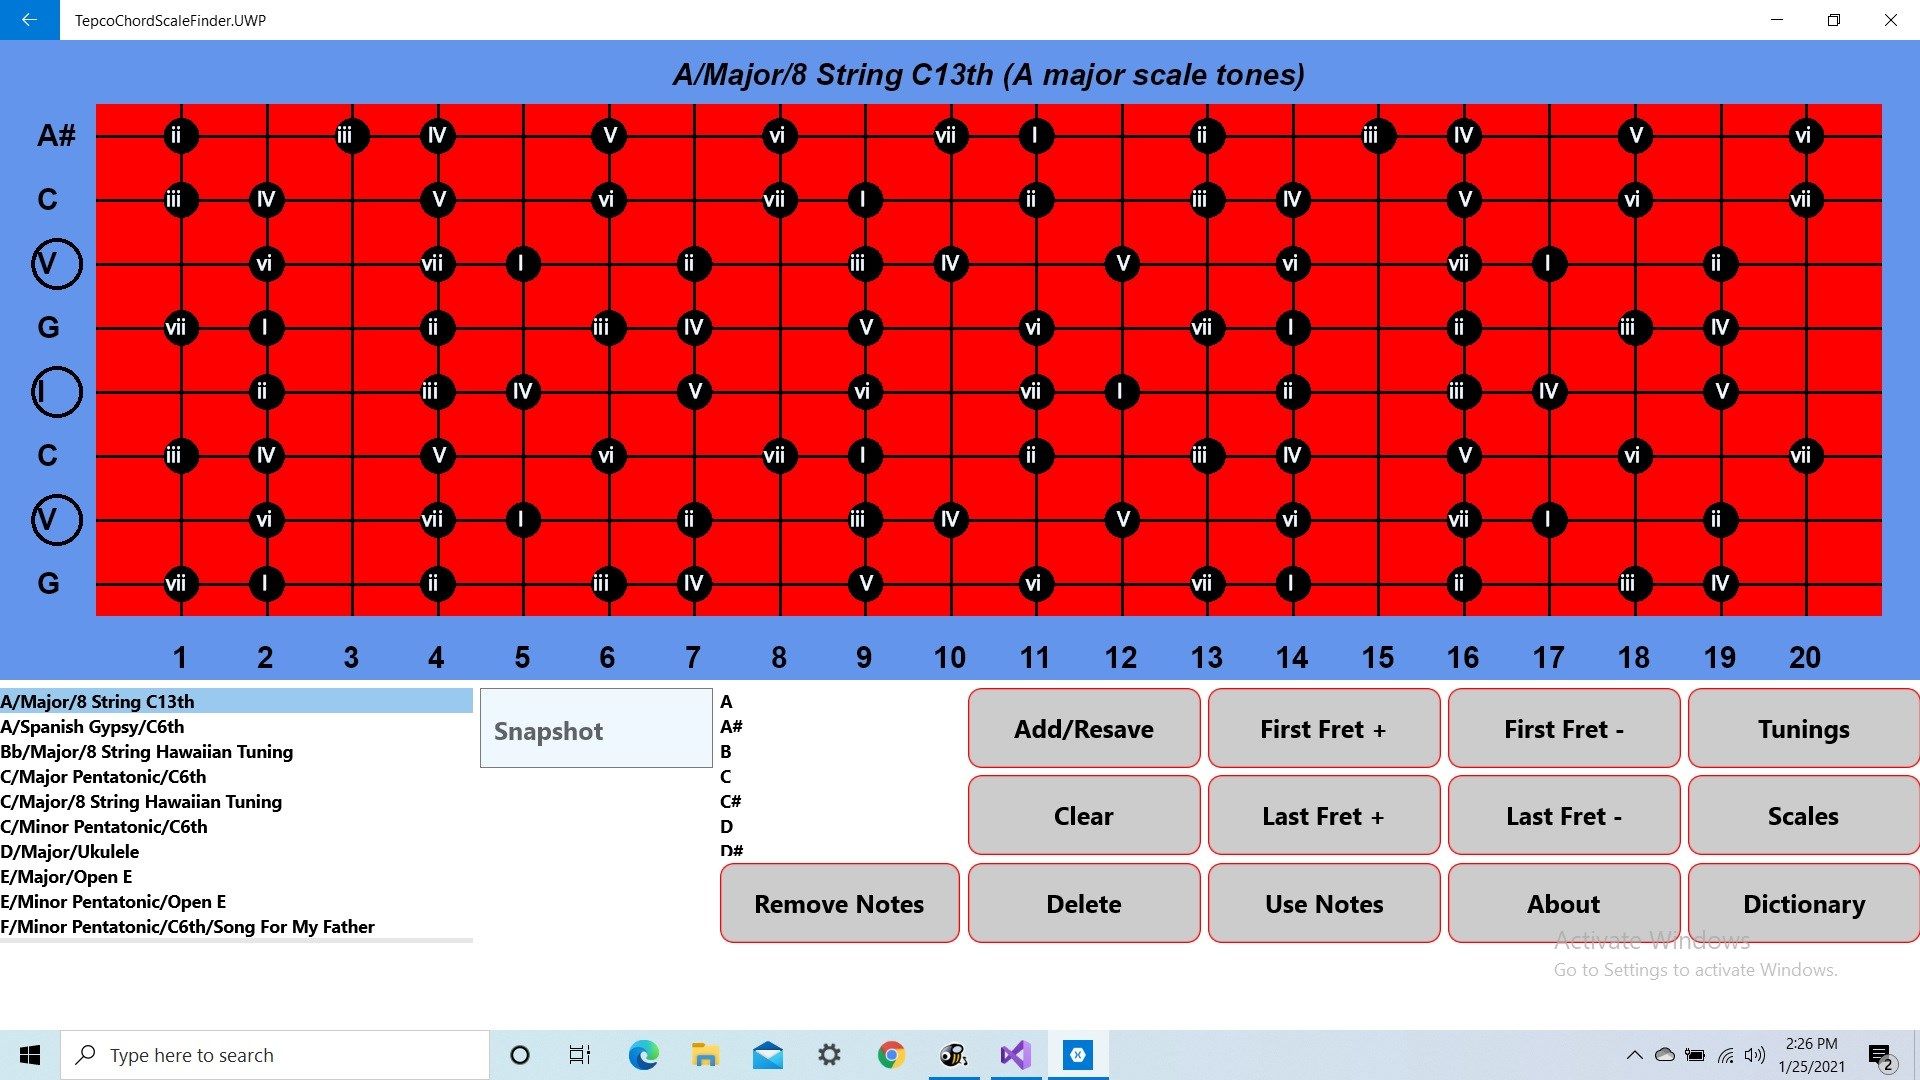 The Chord and Scale Finder